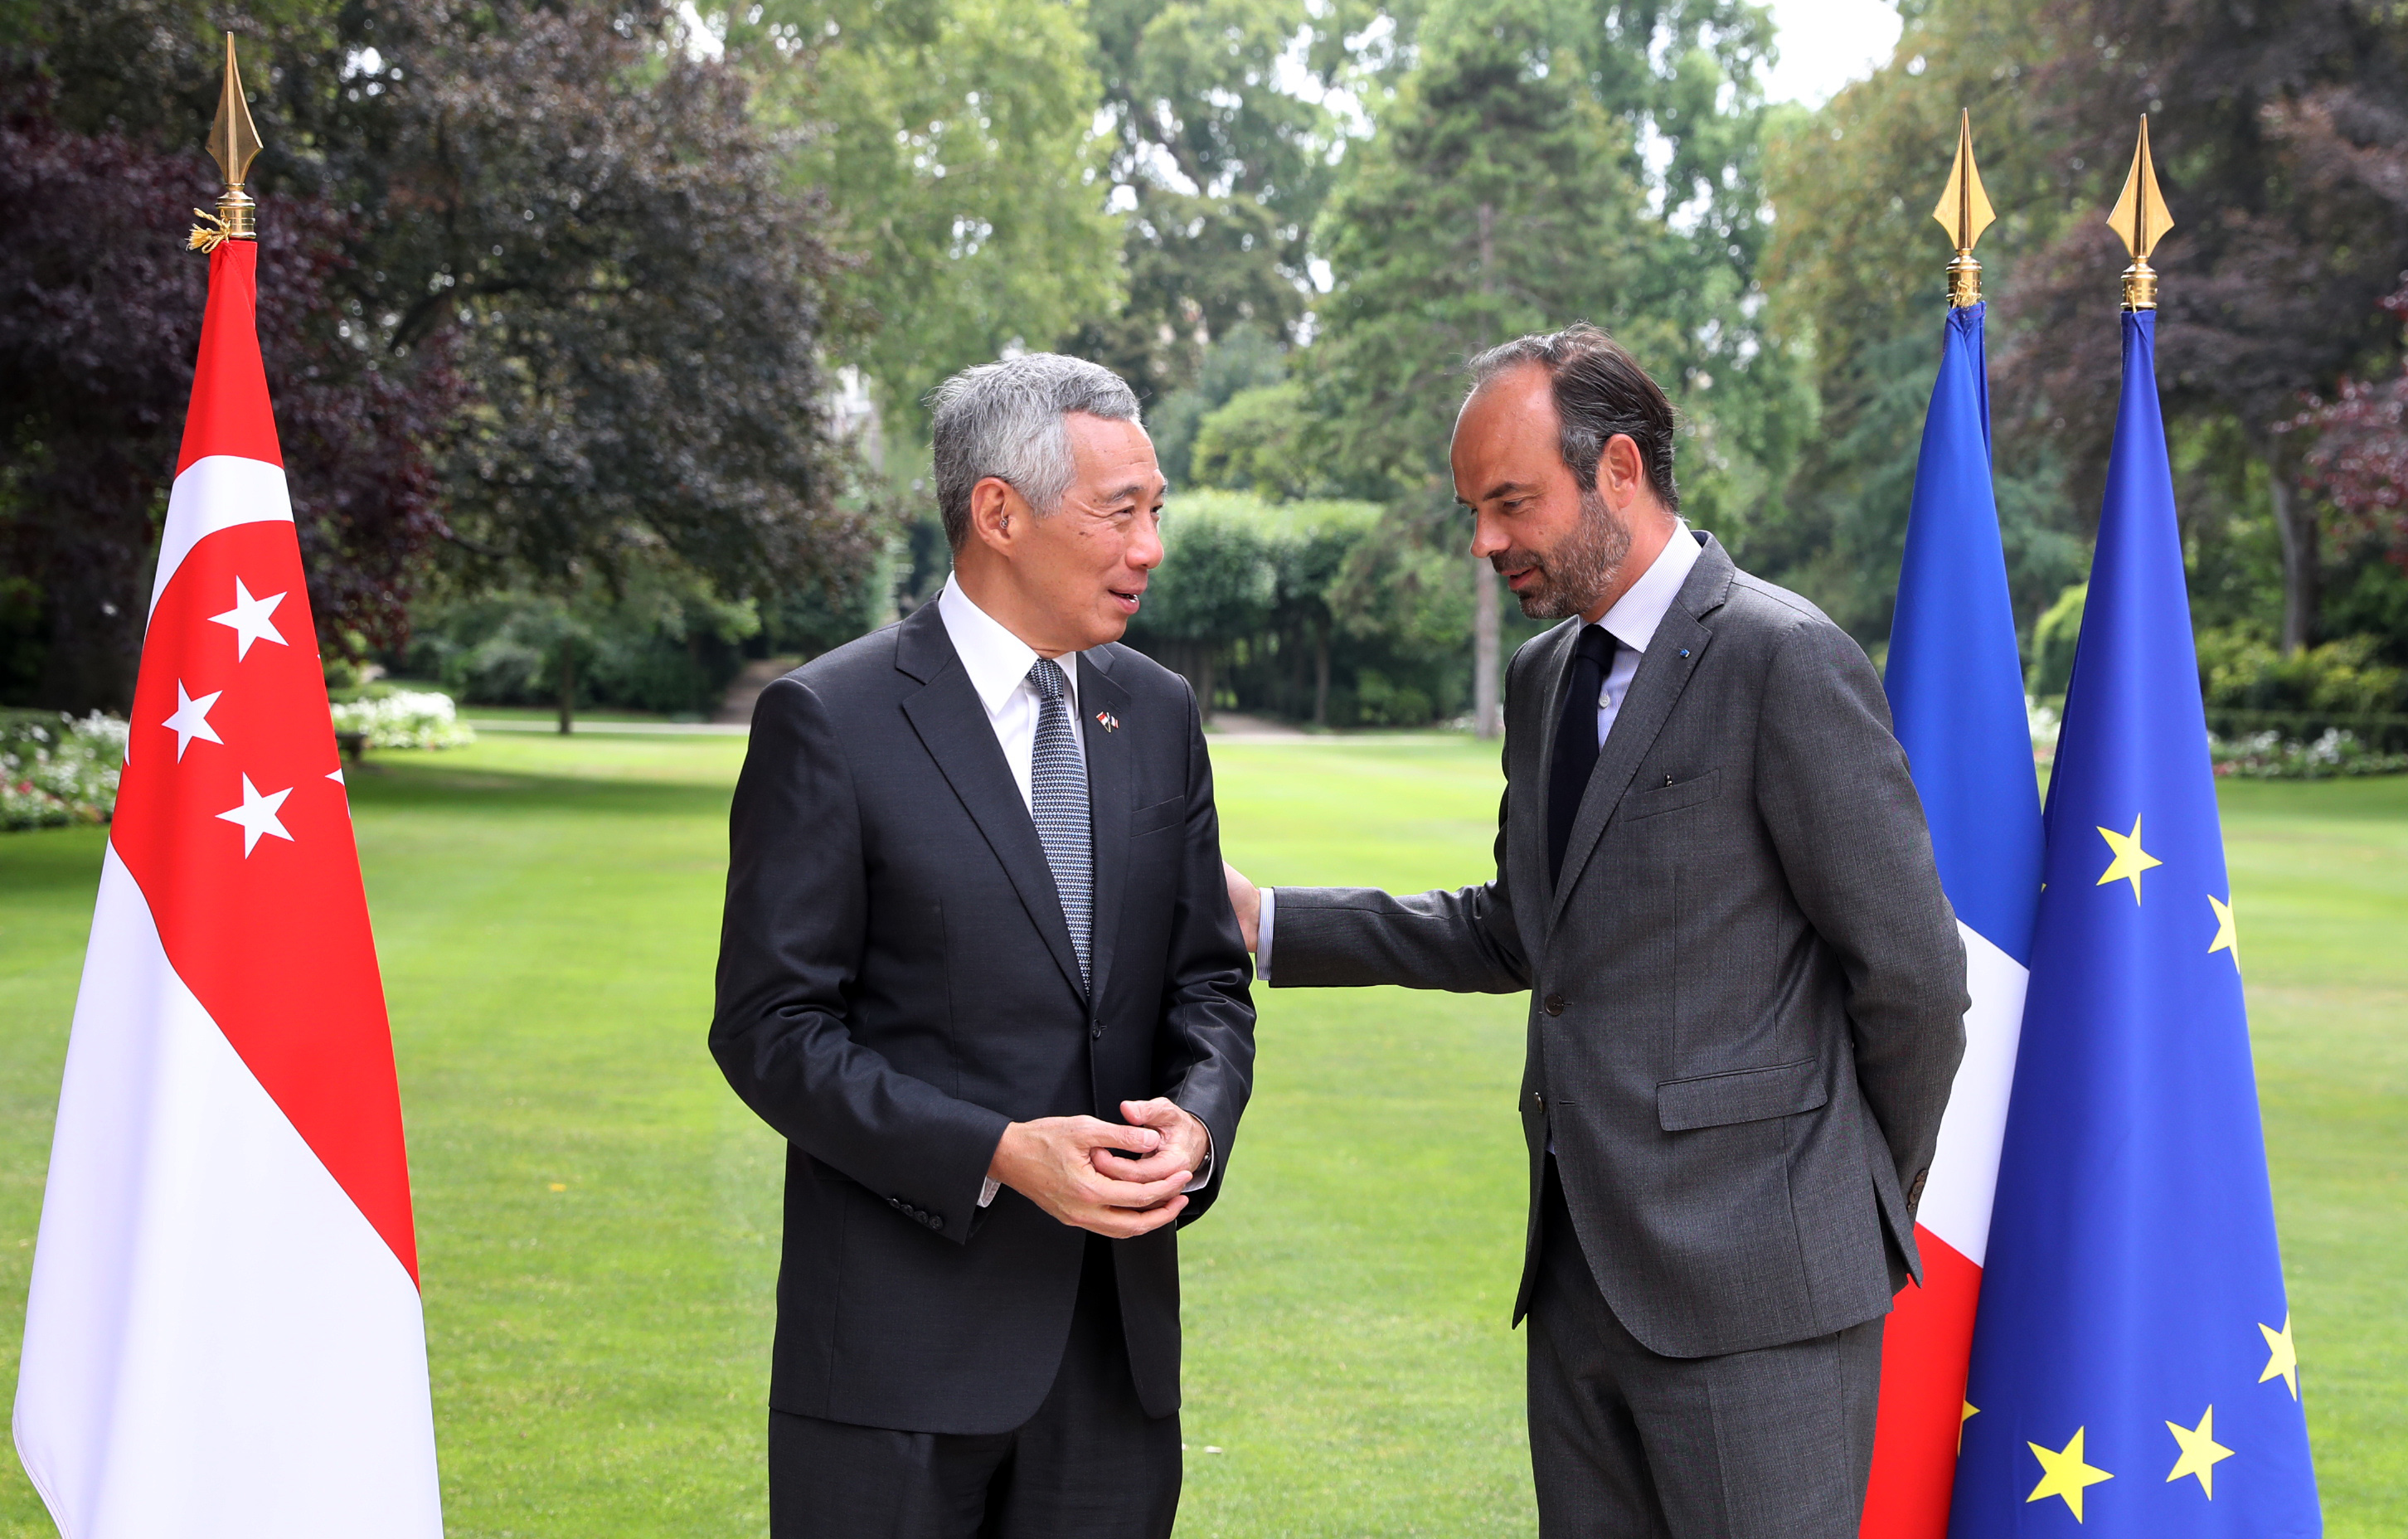 PM Lee Hsien Loong meeting French PM Édouard Philippe on 13 Jul 2018 (MCI Photo by Fyrol)